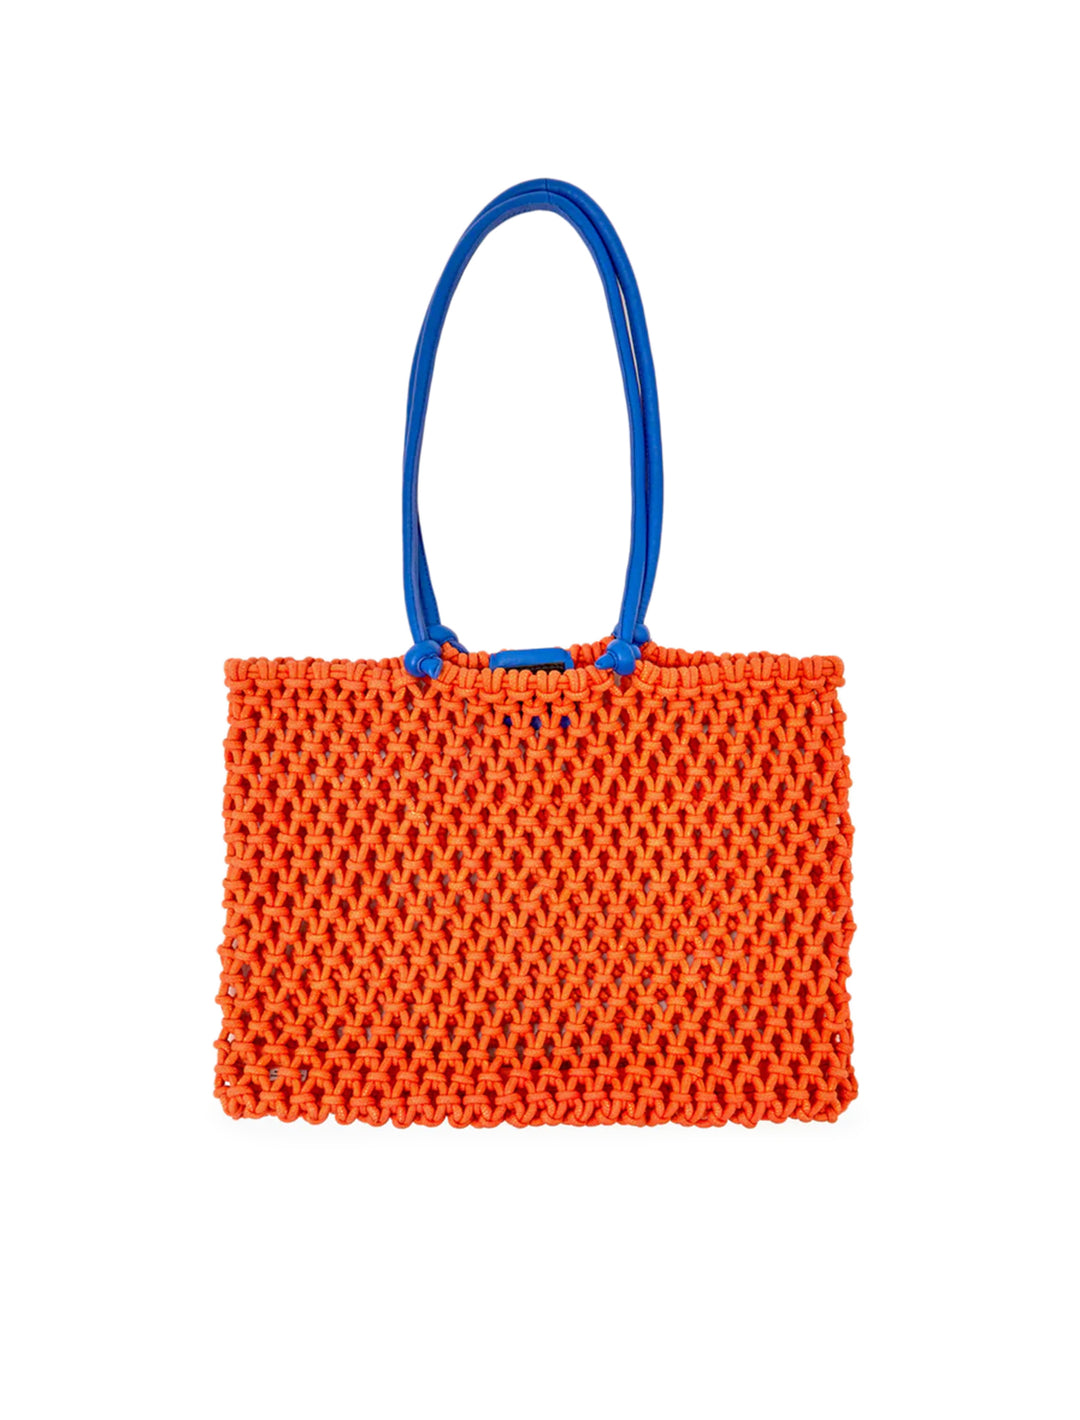 sandy tote in zucca and cobalt